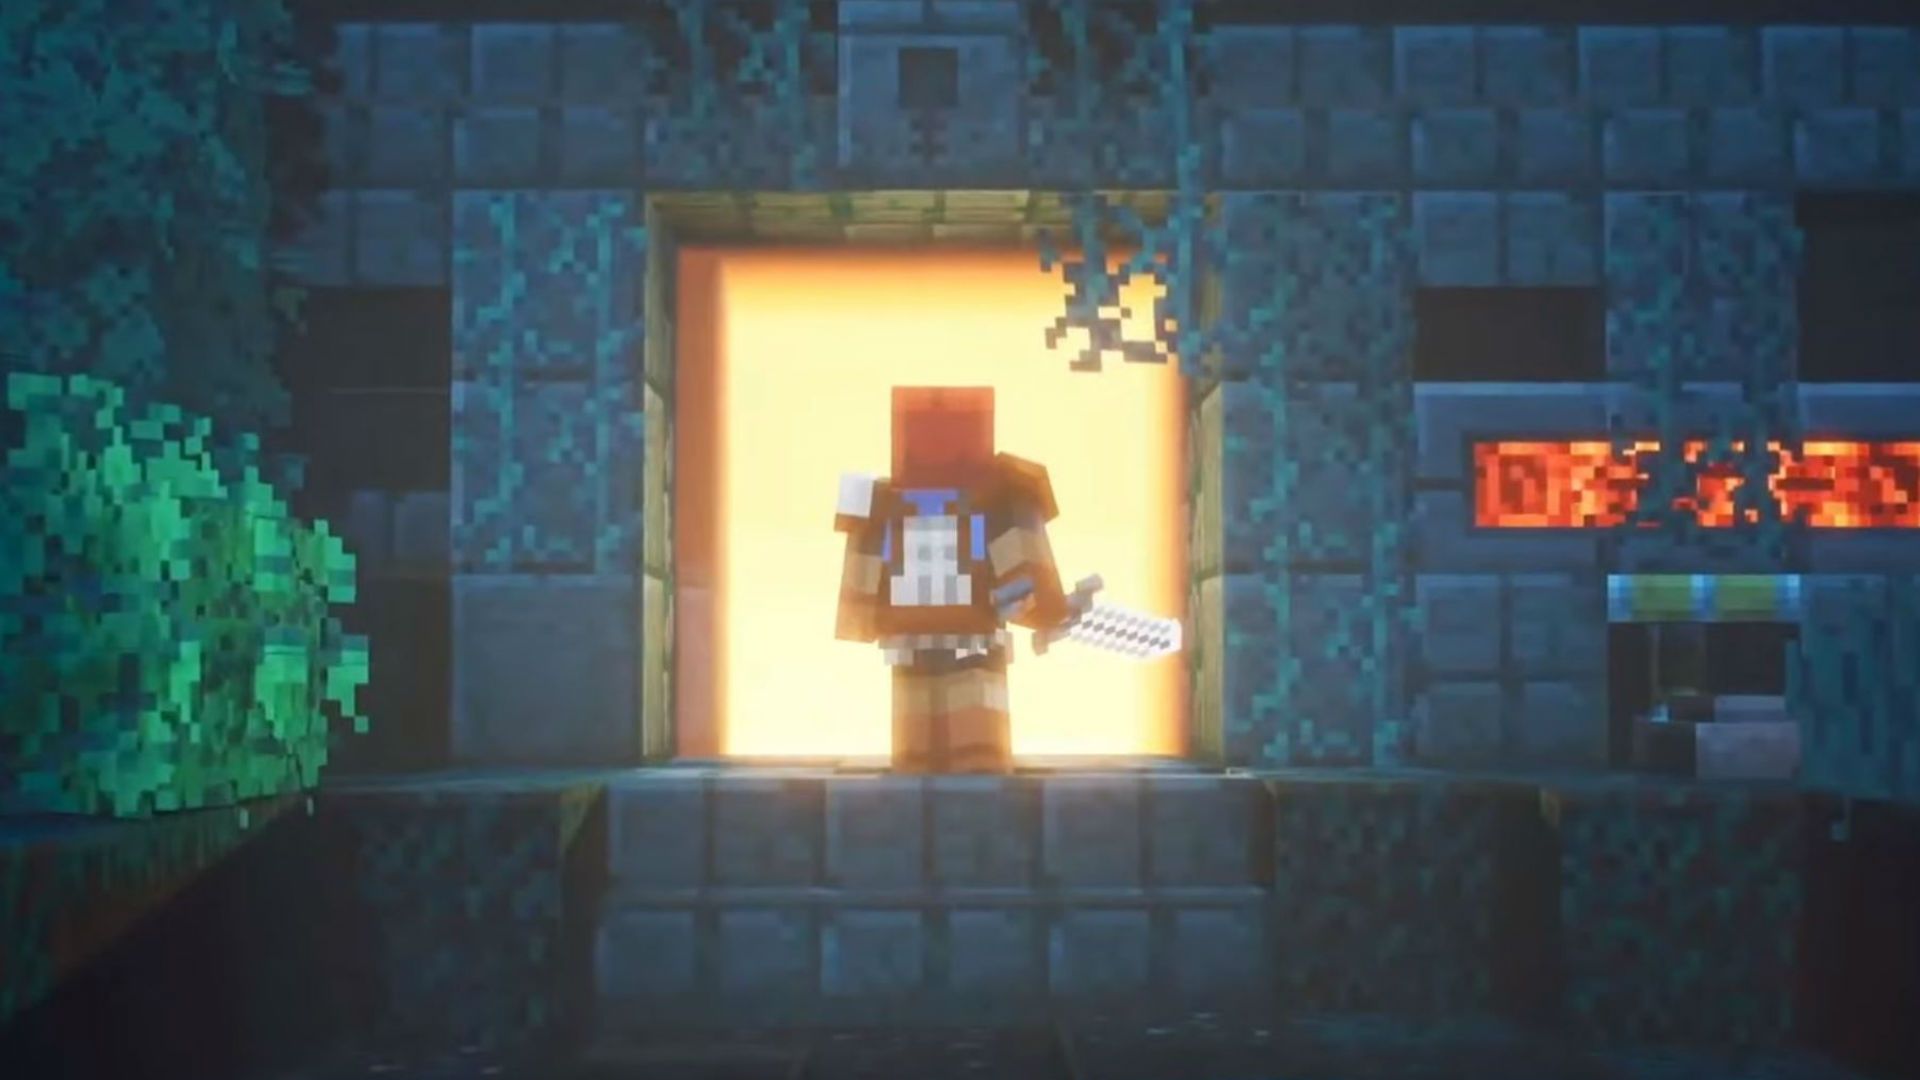 Minecraft: Dungeons adds Diablo and Left 4 Dead to “what Minecraft